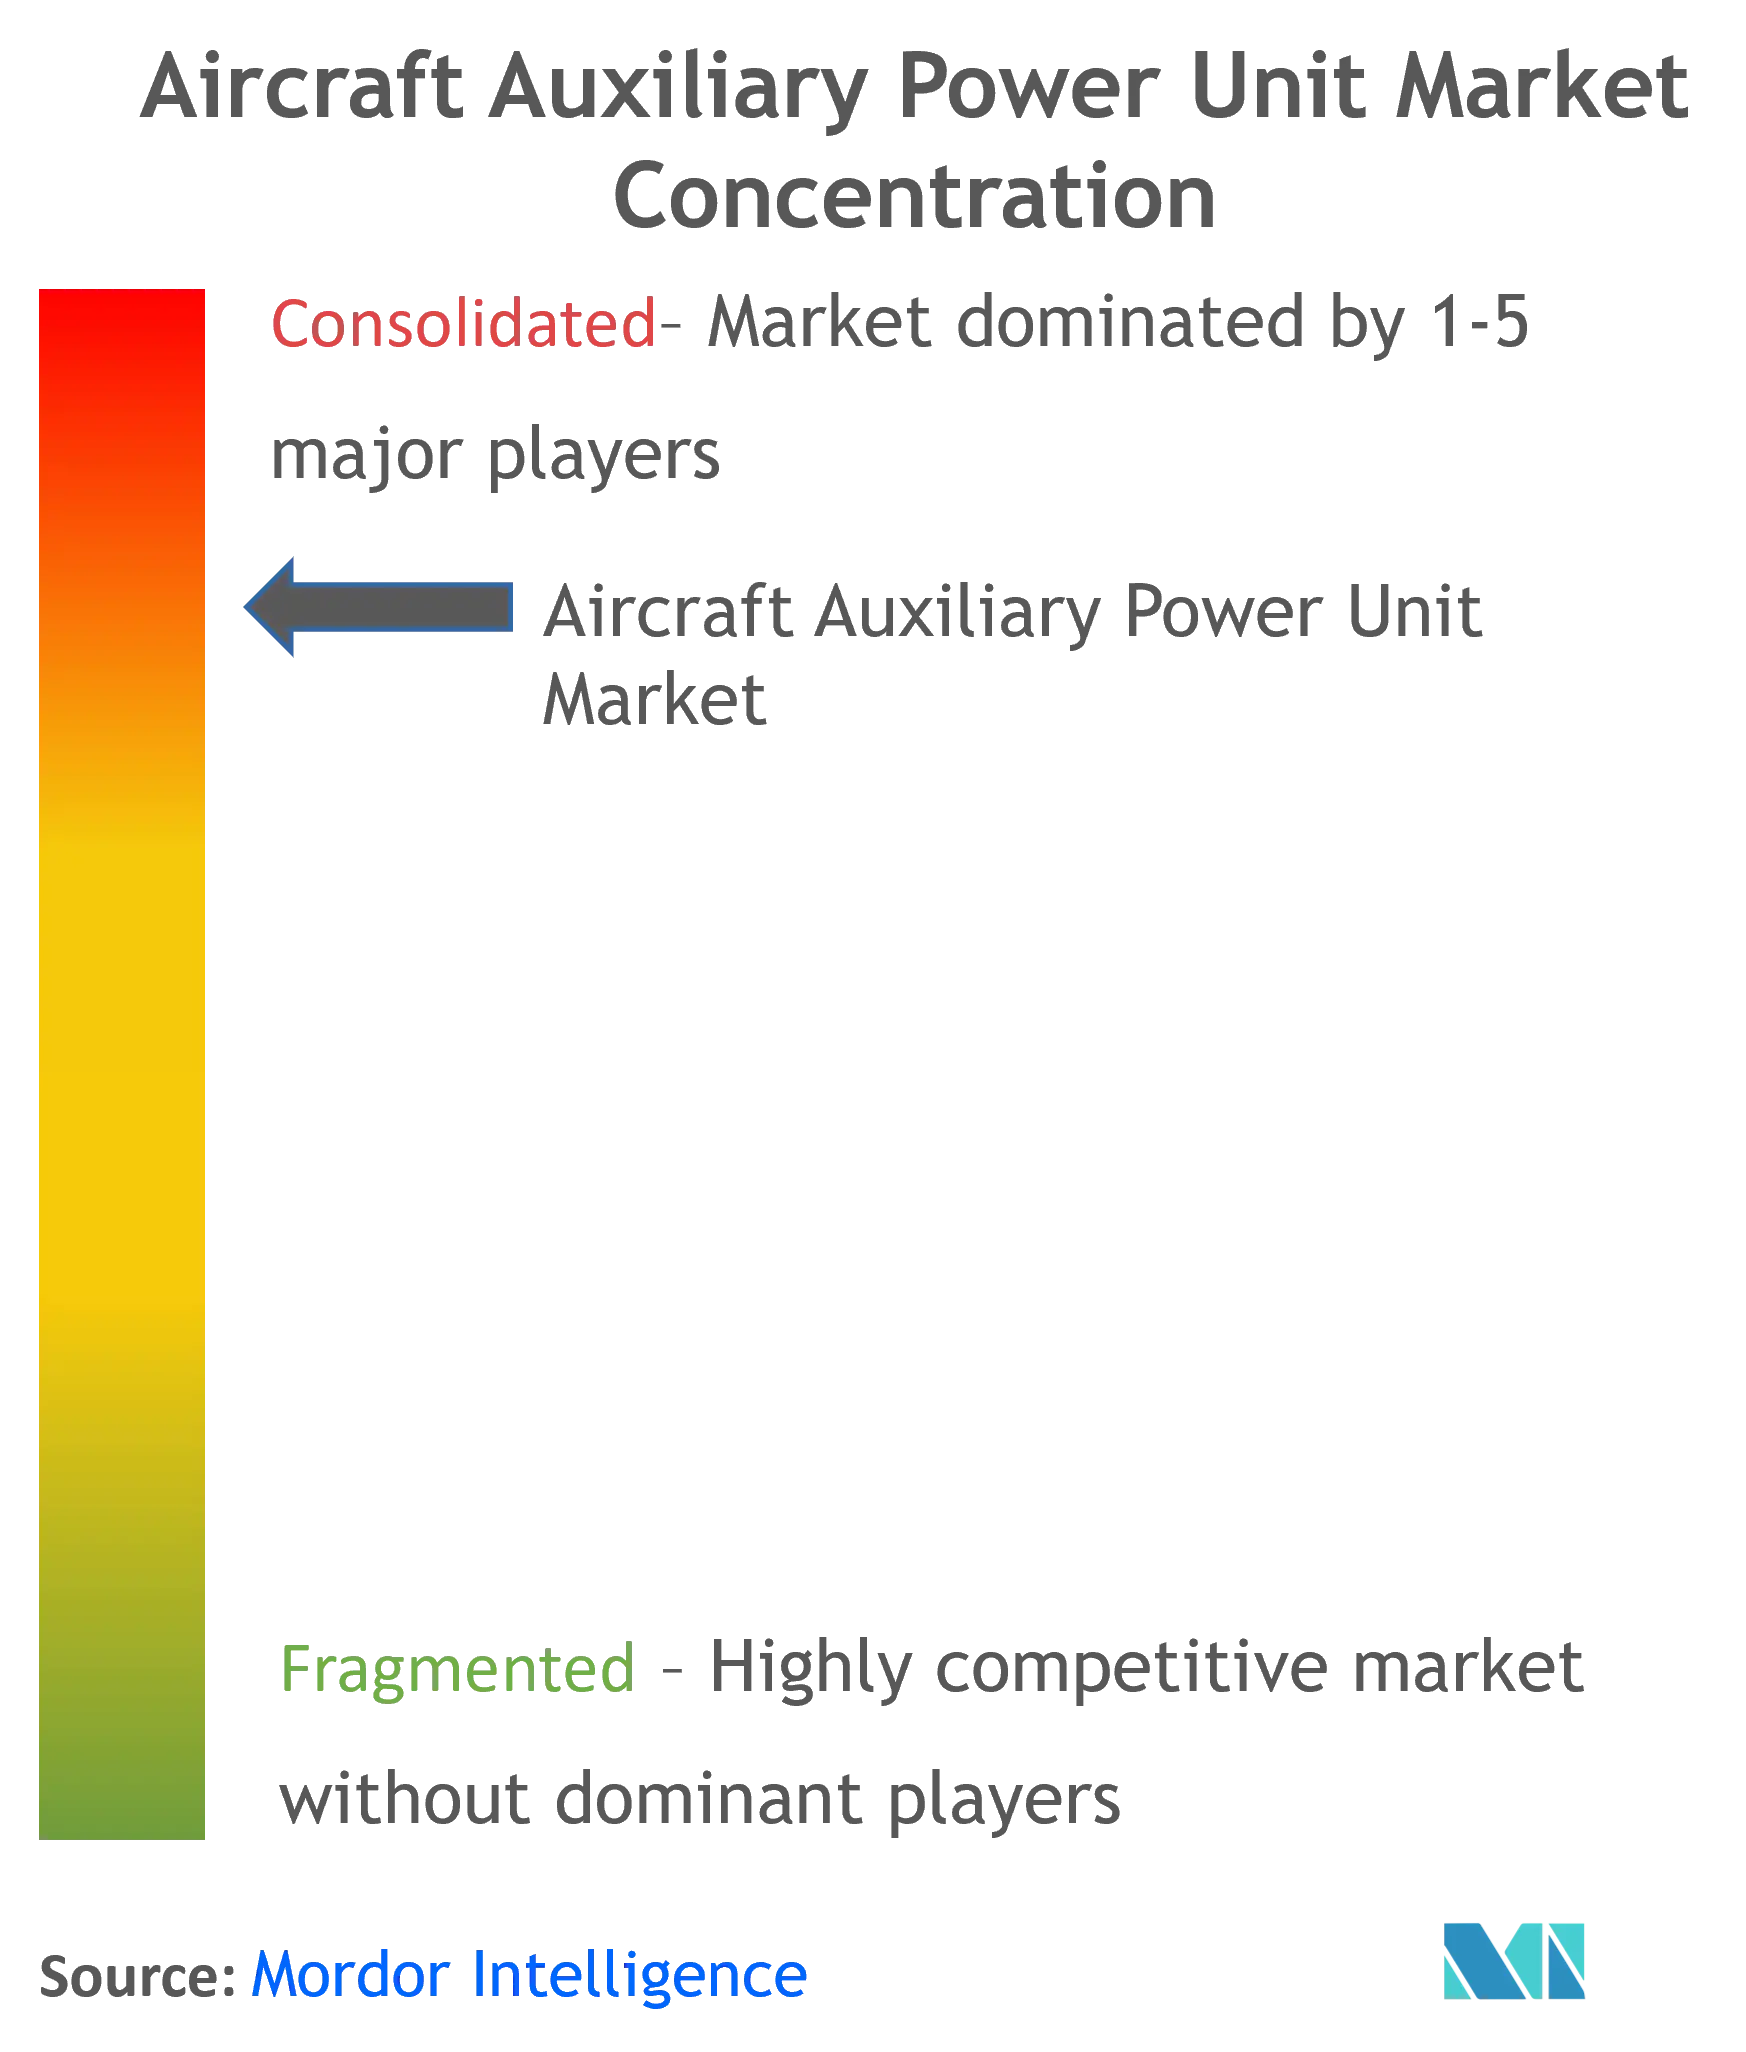 Aircraft Auxiliary Power Unit Market Concentration